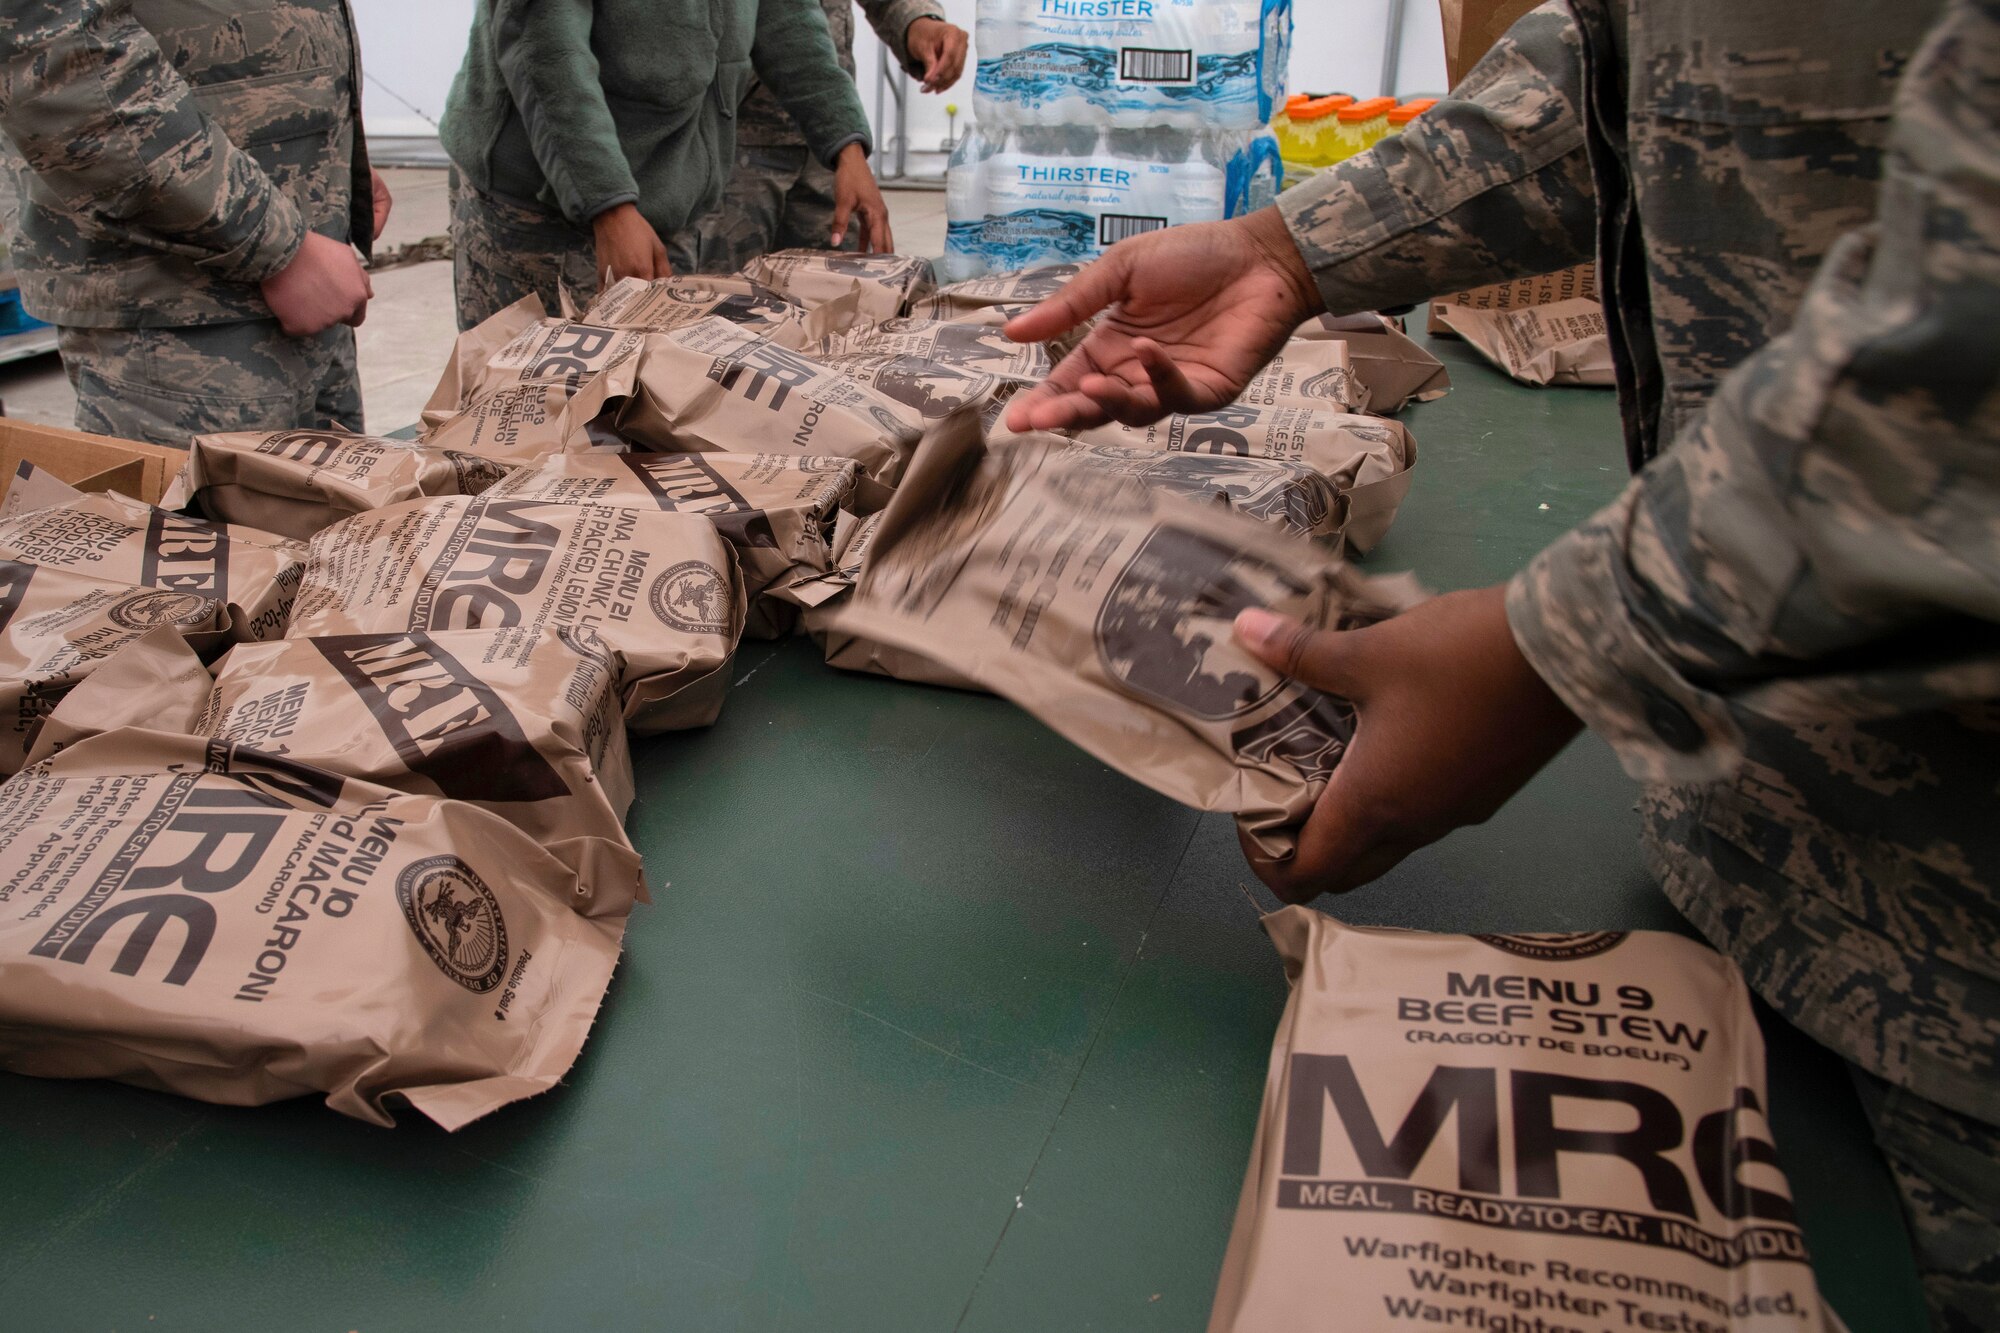 Grand Forks Air Force Base 319th Force Support Squadron airmen sort through ready-to-eat meals May 20, 2019, prior to exercise Summer Viking 19-01 on the Air National Guard Base in Fargo, North Dakota. The readiness exercise focused on preparing and responding to chemical and biological attacks, self-aid and buddy care, and defending a contested base. (U.S. Air Force photo by Senior Airman Elora J. Martinez)